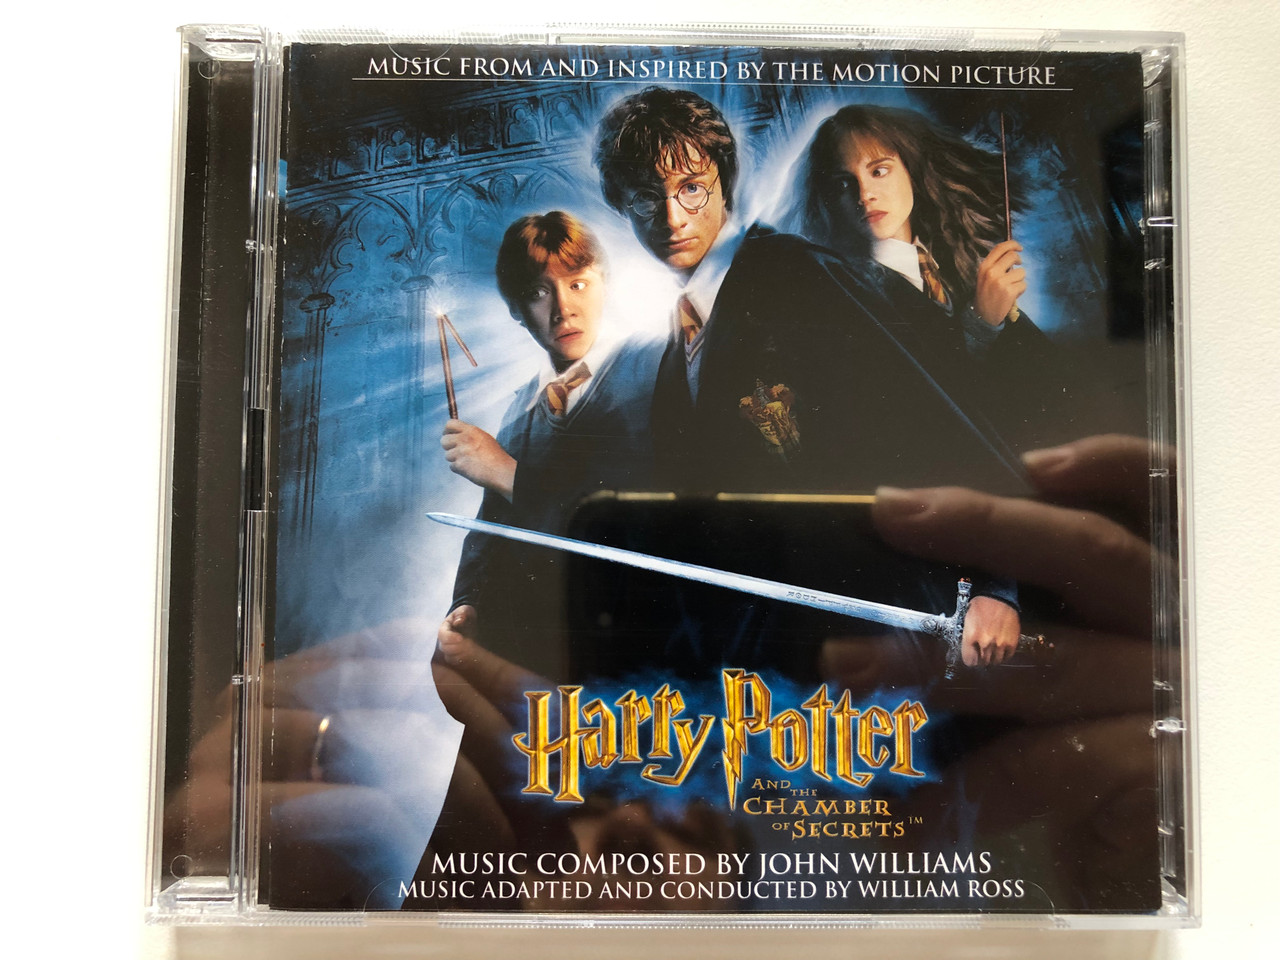 https://cdn10.bigcommerce.com/s-62bdpkt7pb/products/0/images/214452/Harry_Potter_And_The_Chamber_Of_Secrets_Music_From_And_Inspired_By_The_Motion_Picture_-_Music_Composed_By_John_Williams_Music_Adapted_And_Conducted_By_William_Ross_Warner_Sunset_Records_A_1__40971.1646026863.1280.1280.JPG?c=2&_gl=1*ul5rqz*_ga*MjA2NTIxMjE2MC4xNTkwNTEyNTMy*_ga_WS2VZYPC6G*MTY0NjAxOTM2NS4zMDQuMS4xNjQ2MDI2NTU4LjQx